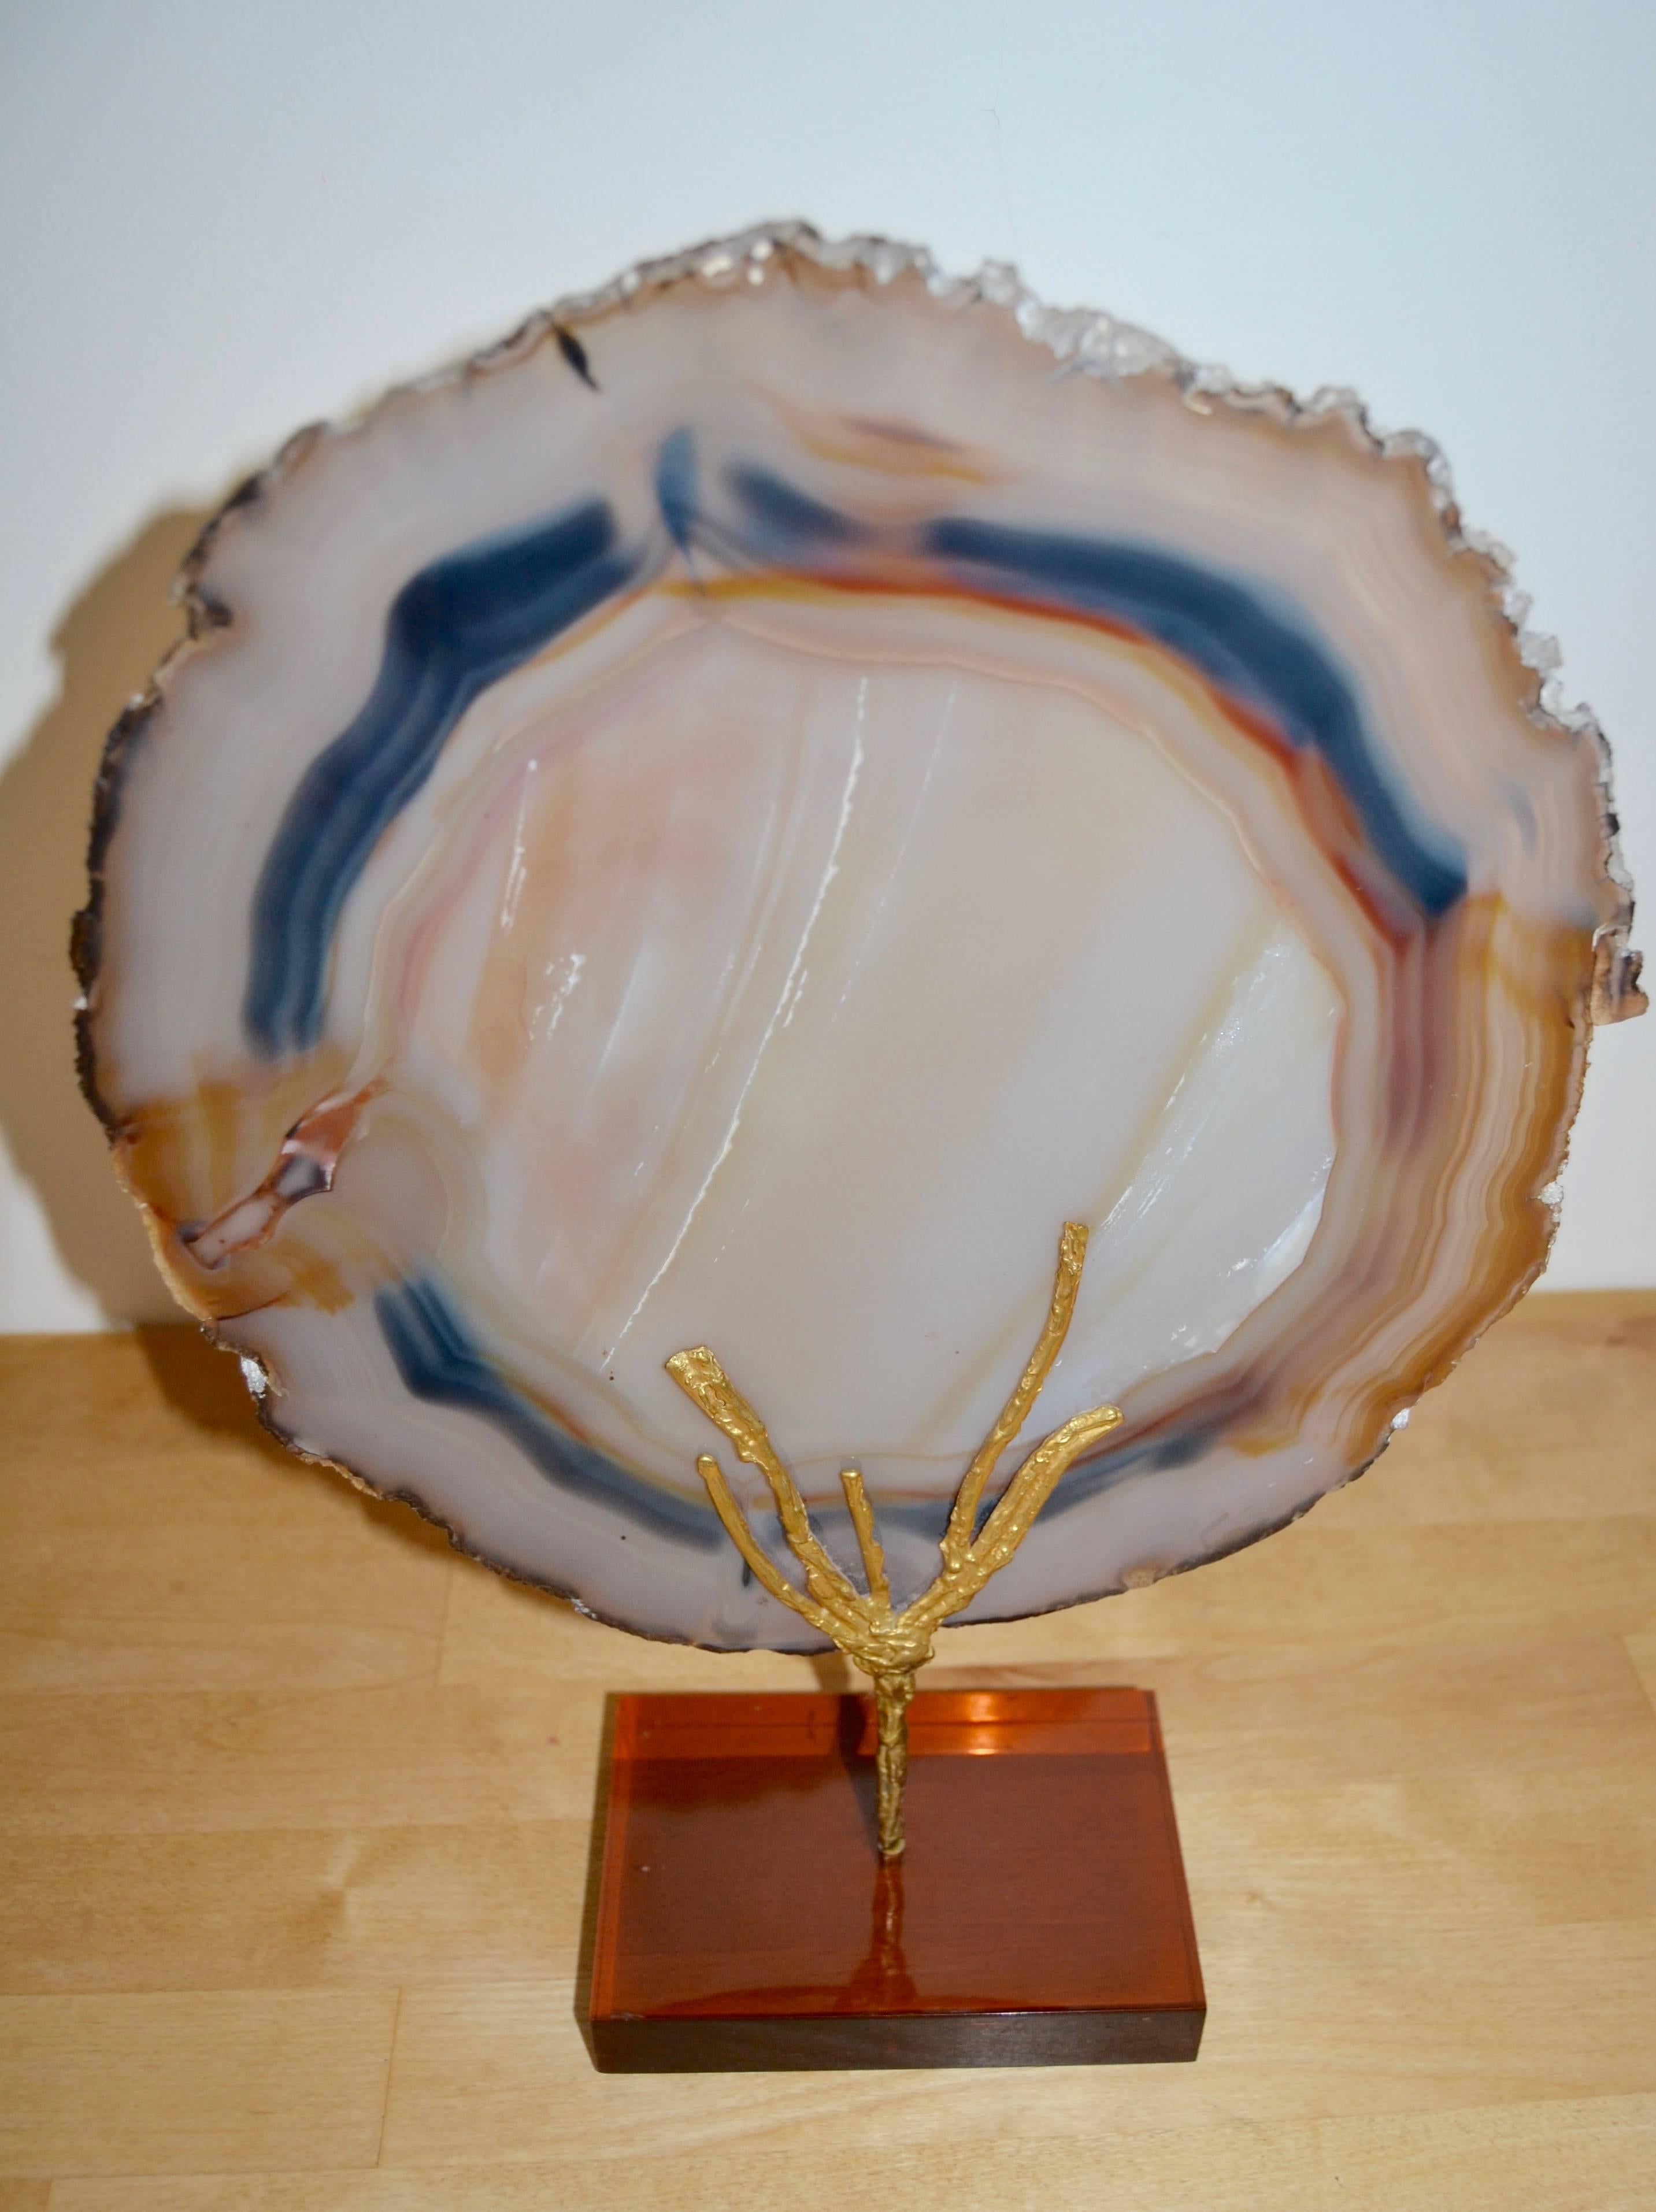 1970s mounted agate slice on bronze and smoked Lucite base.
Great vintage condition.